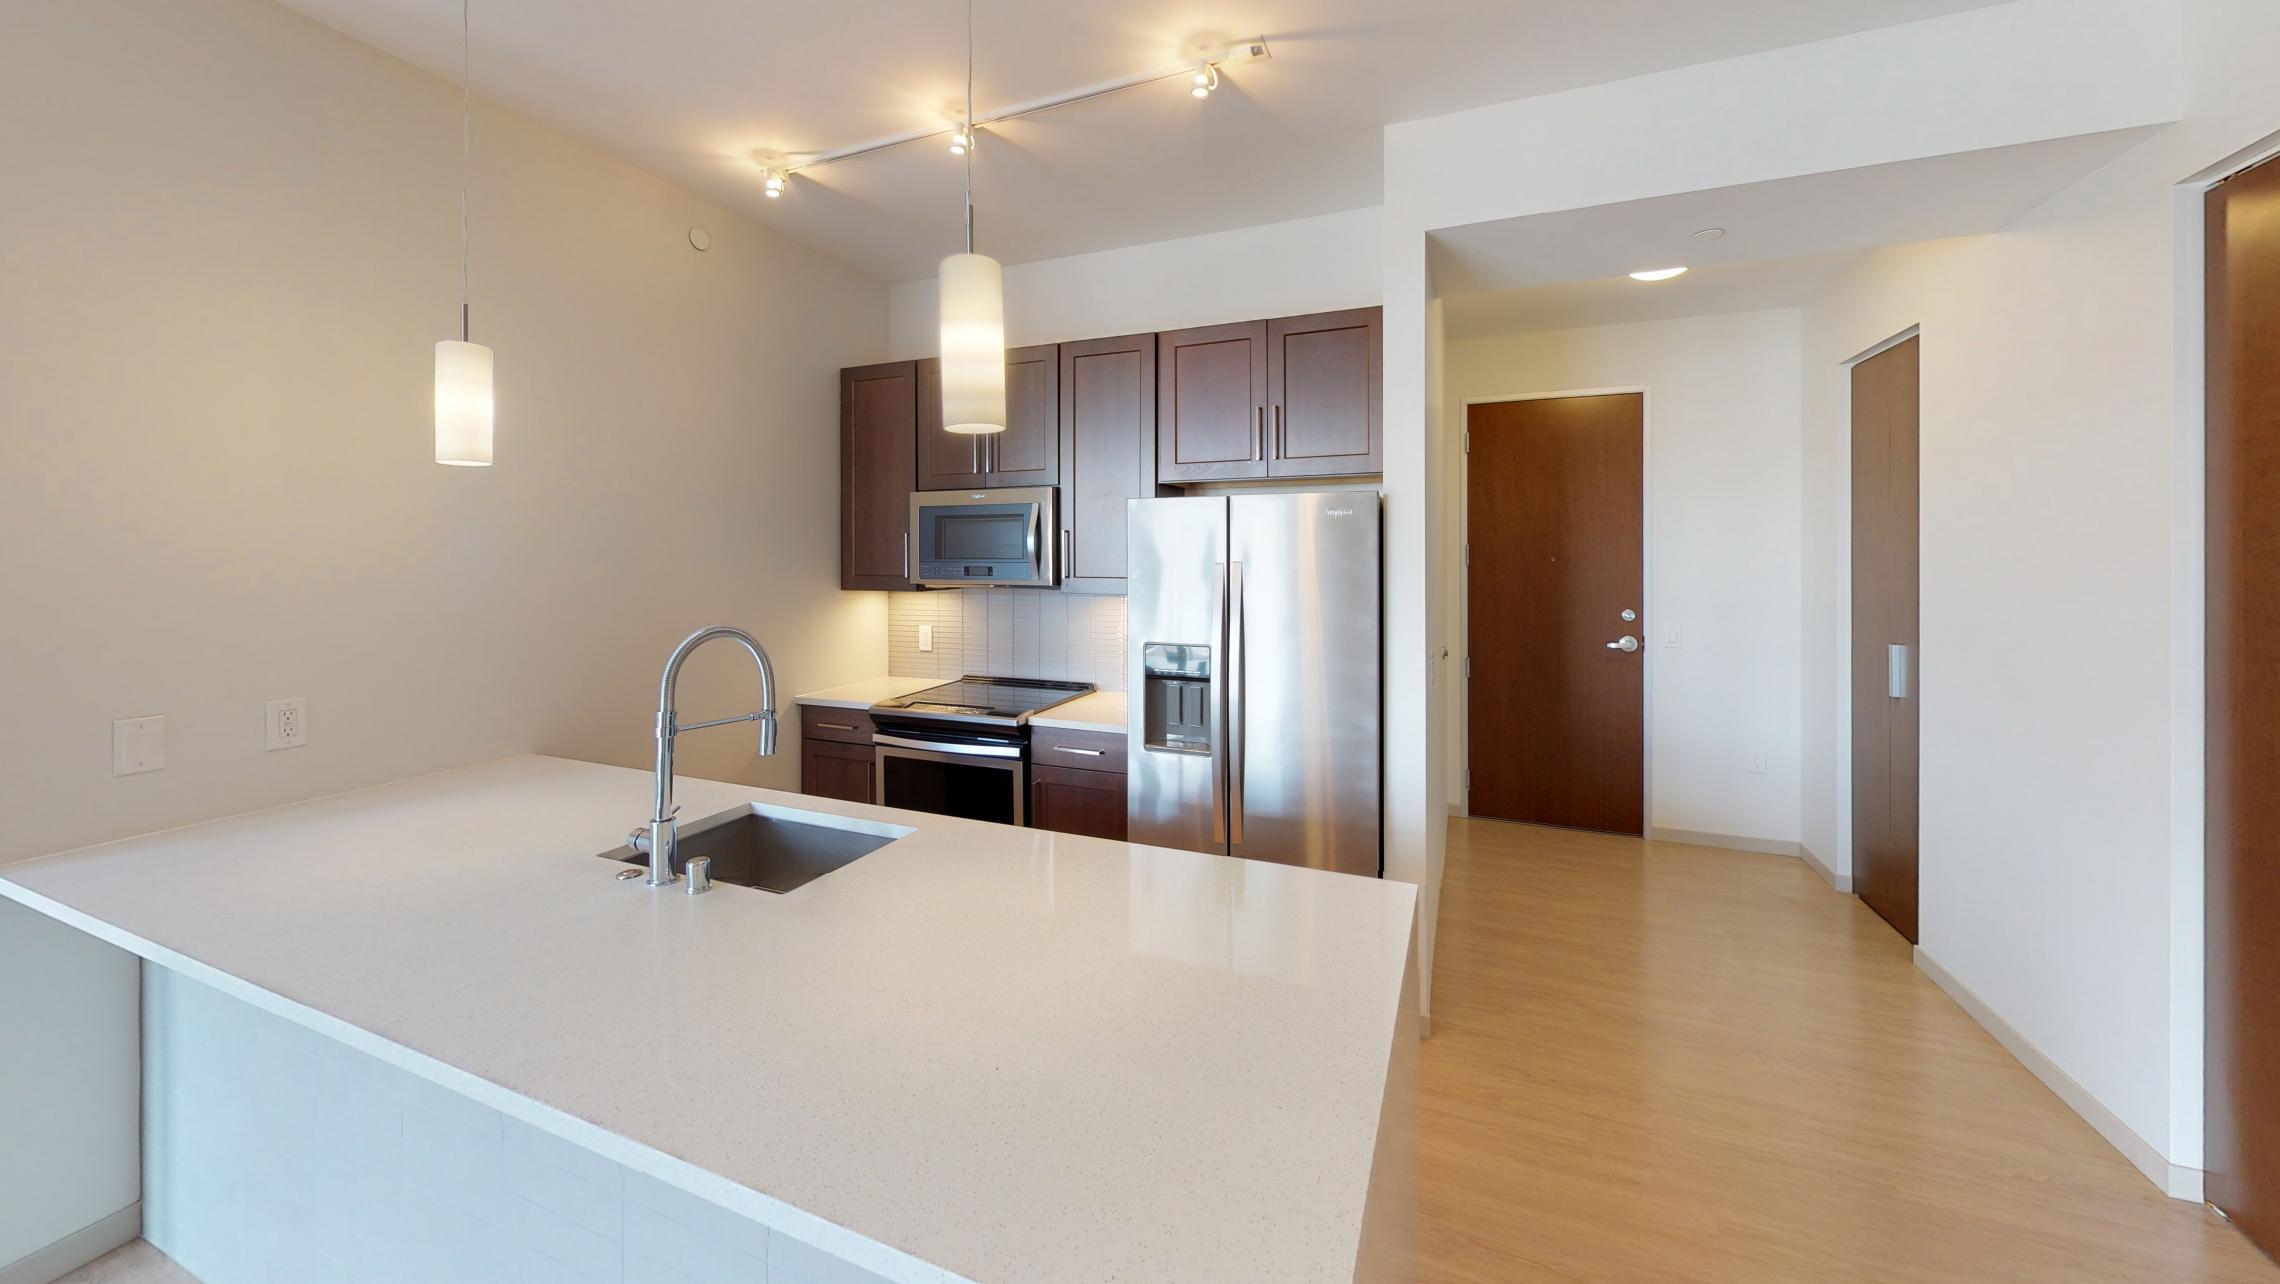 Pressman-Apartment-504-One-Bedroom-Balcony-City-View-Luxury-Downtown-Upscale-Modern-Downtown-Madison-Capitol-Square-Kitchen-Entrance